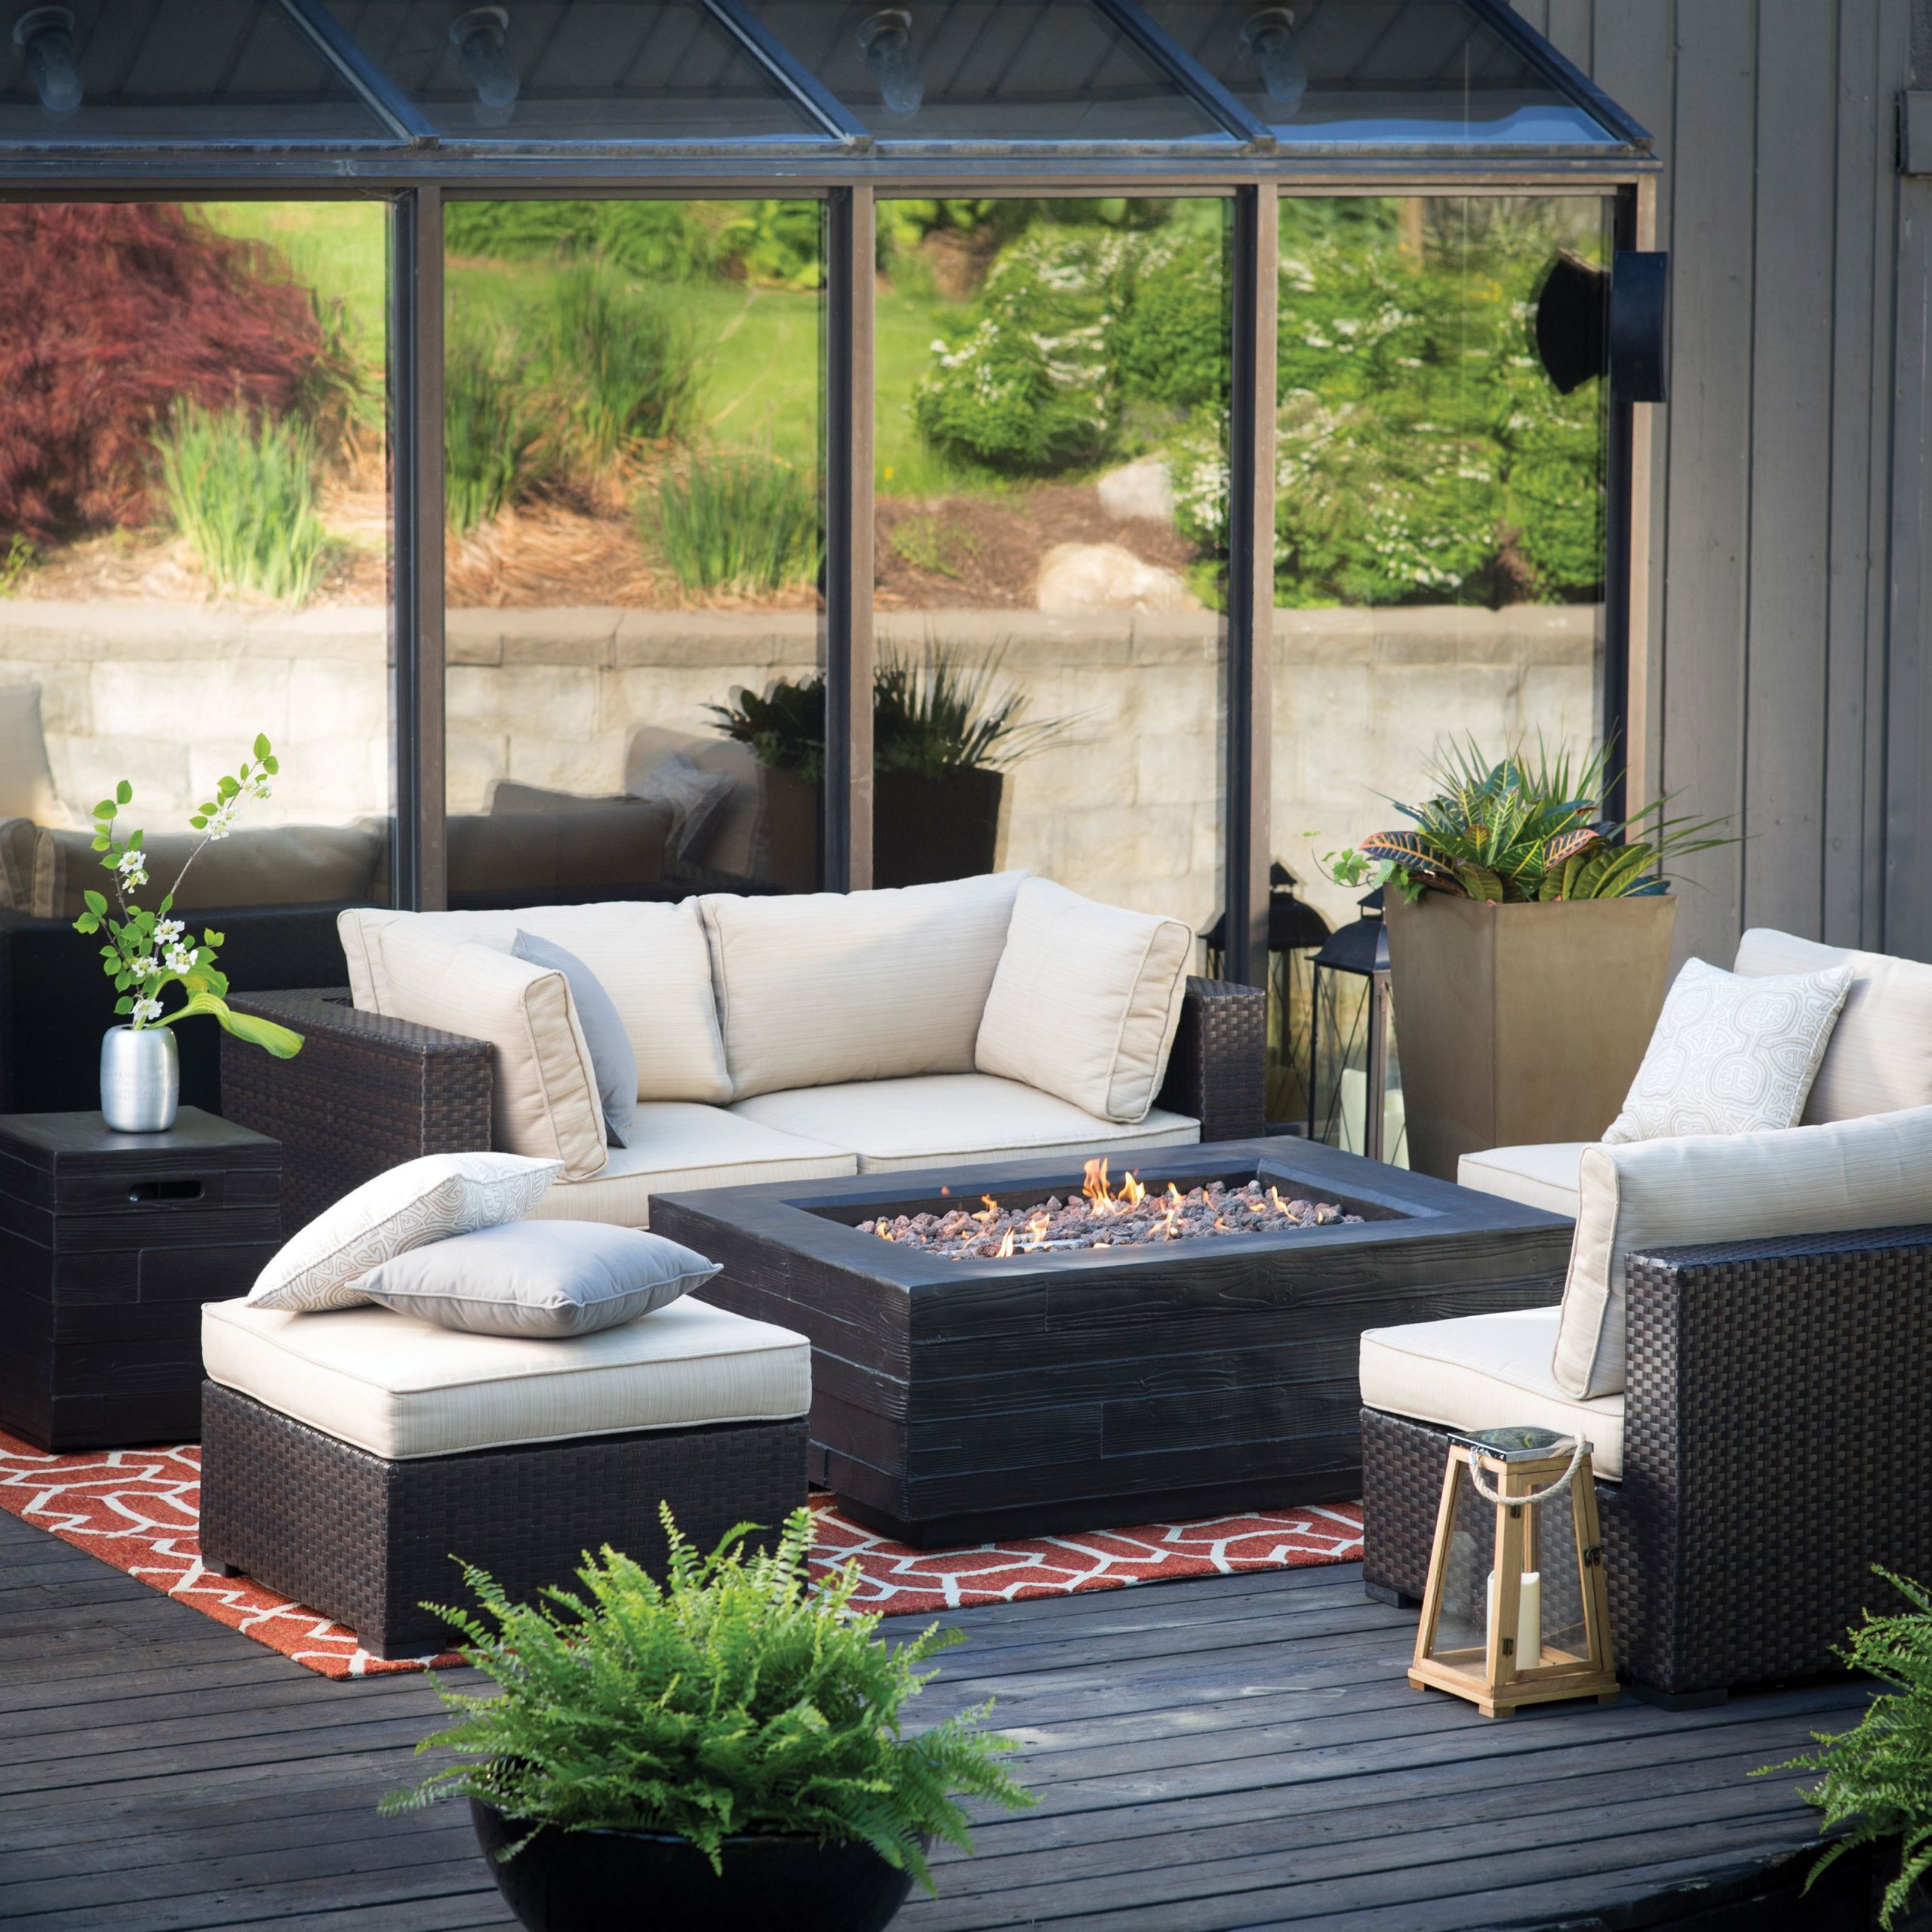 Patio Sets With Fire Pit
 Belham Living Marcella Wicker Sectional with Bozeman Fire